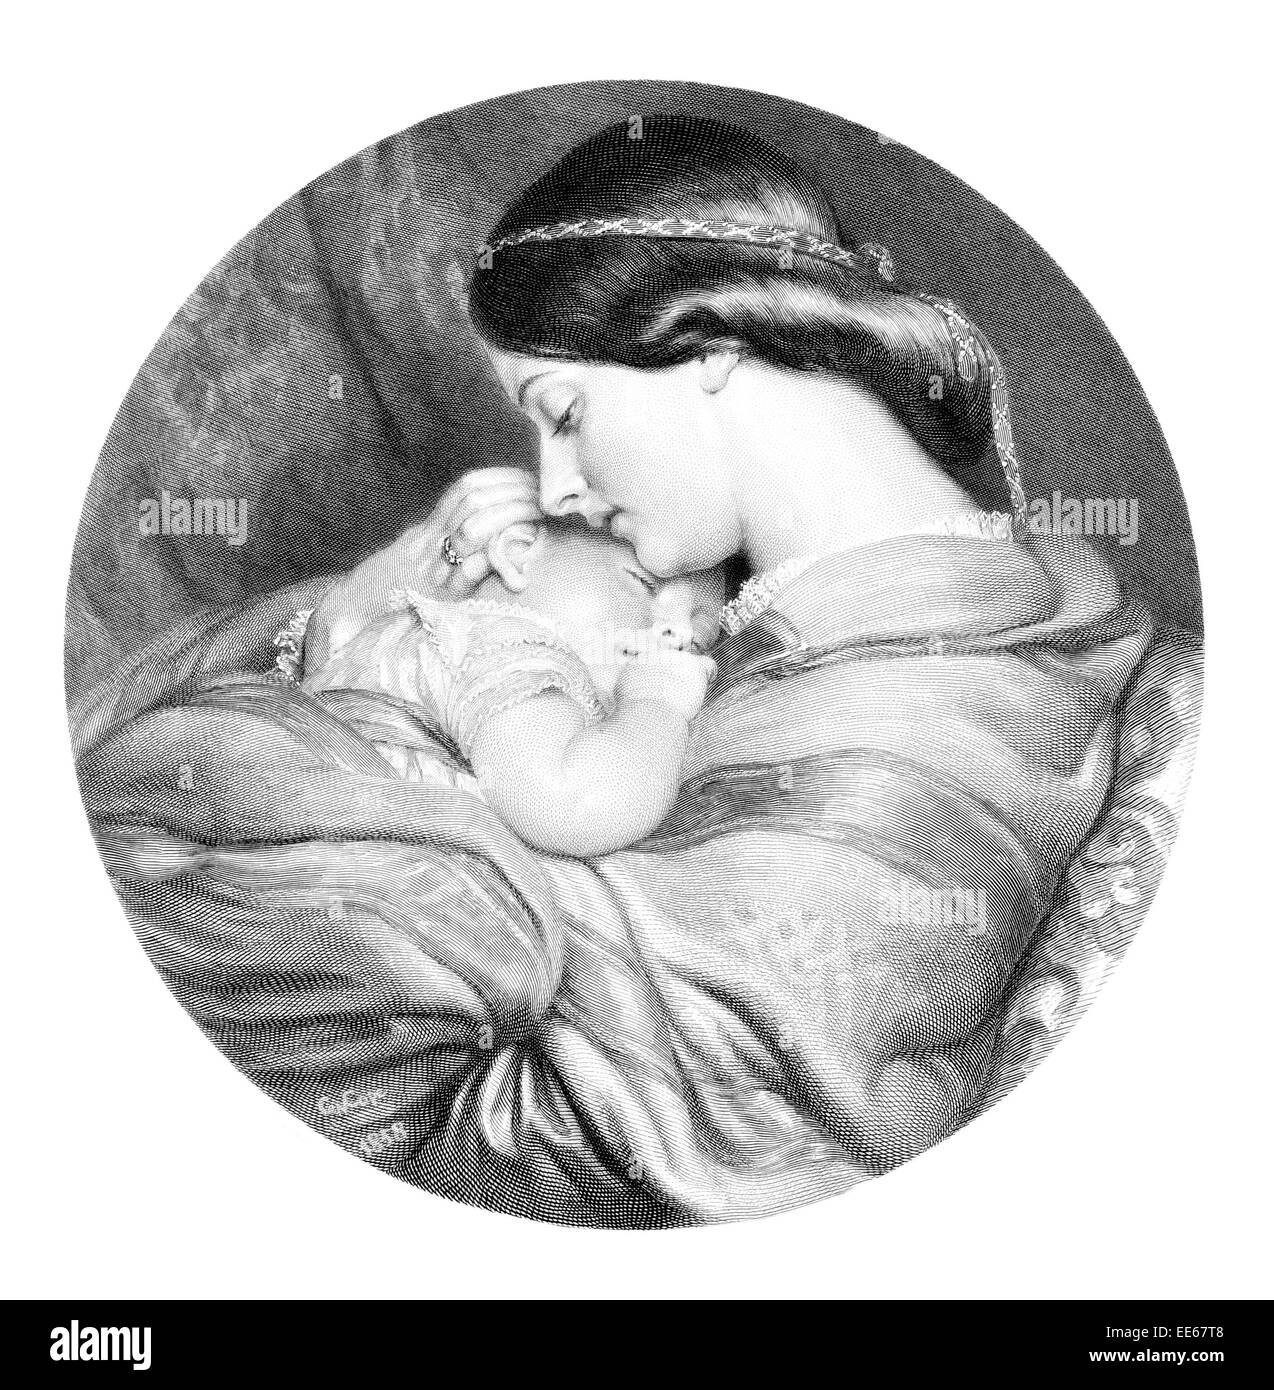 The Young Mother Charles West Cope Woman Female grace graceful beauty female Lady girl baby child infant sleeping rest cradle Stock Photo